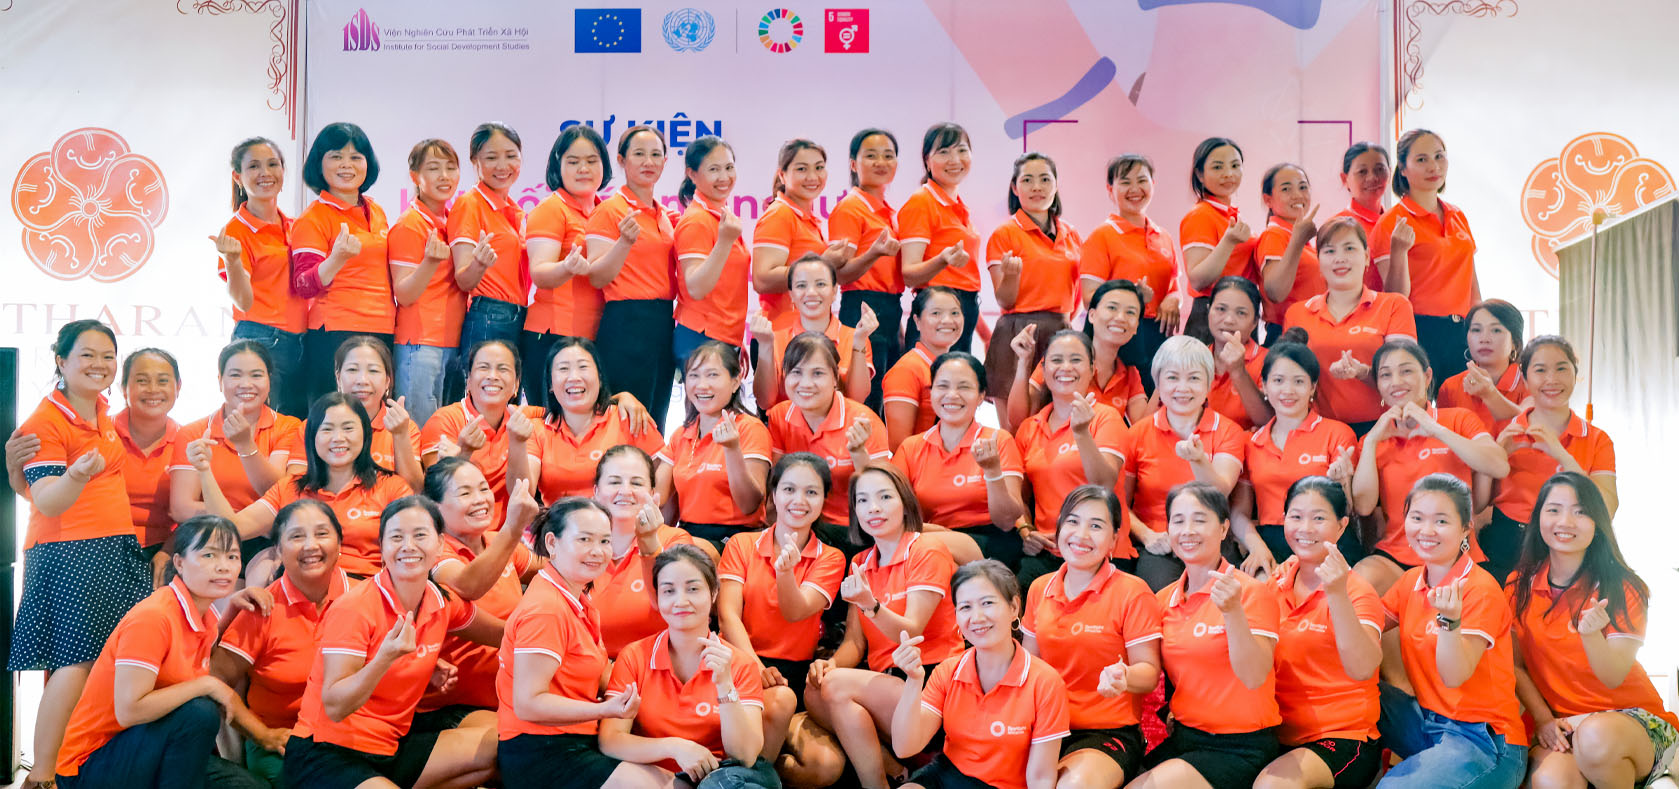 Within one year, the network of migrant workers in Ha Tinh has grown quickly from 60 core members to 967 members in June 2022.  Photo: UN Women/Thao Hoang